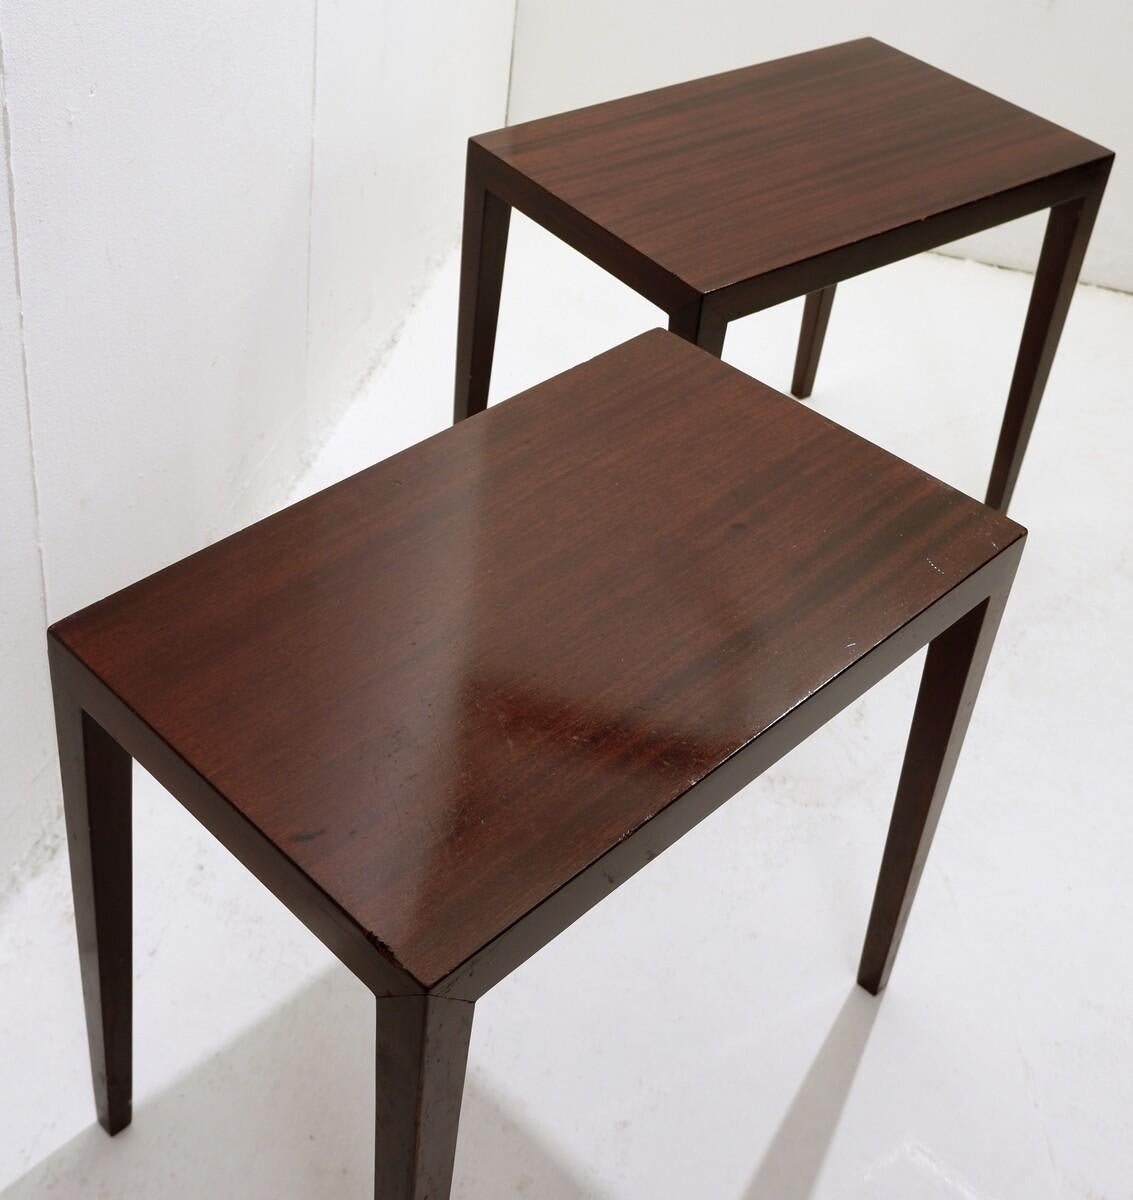 Pair of mid-century Danish side tables by Severin Hansen for Haslev Furniture - 1960s.